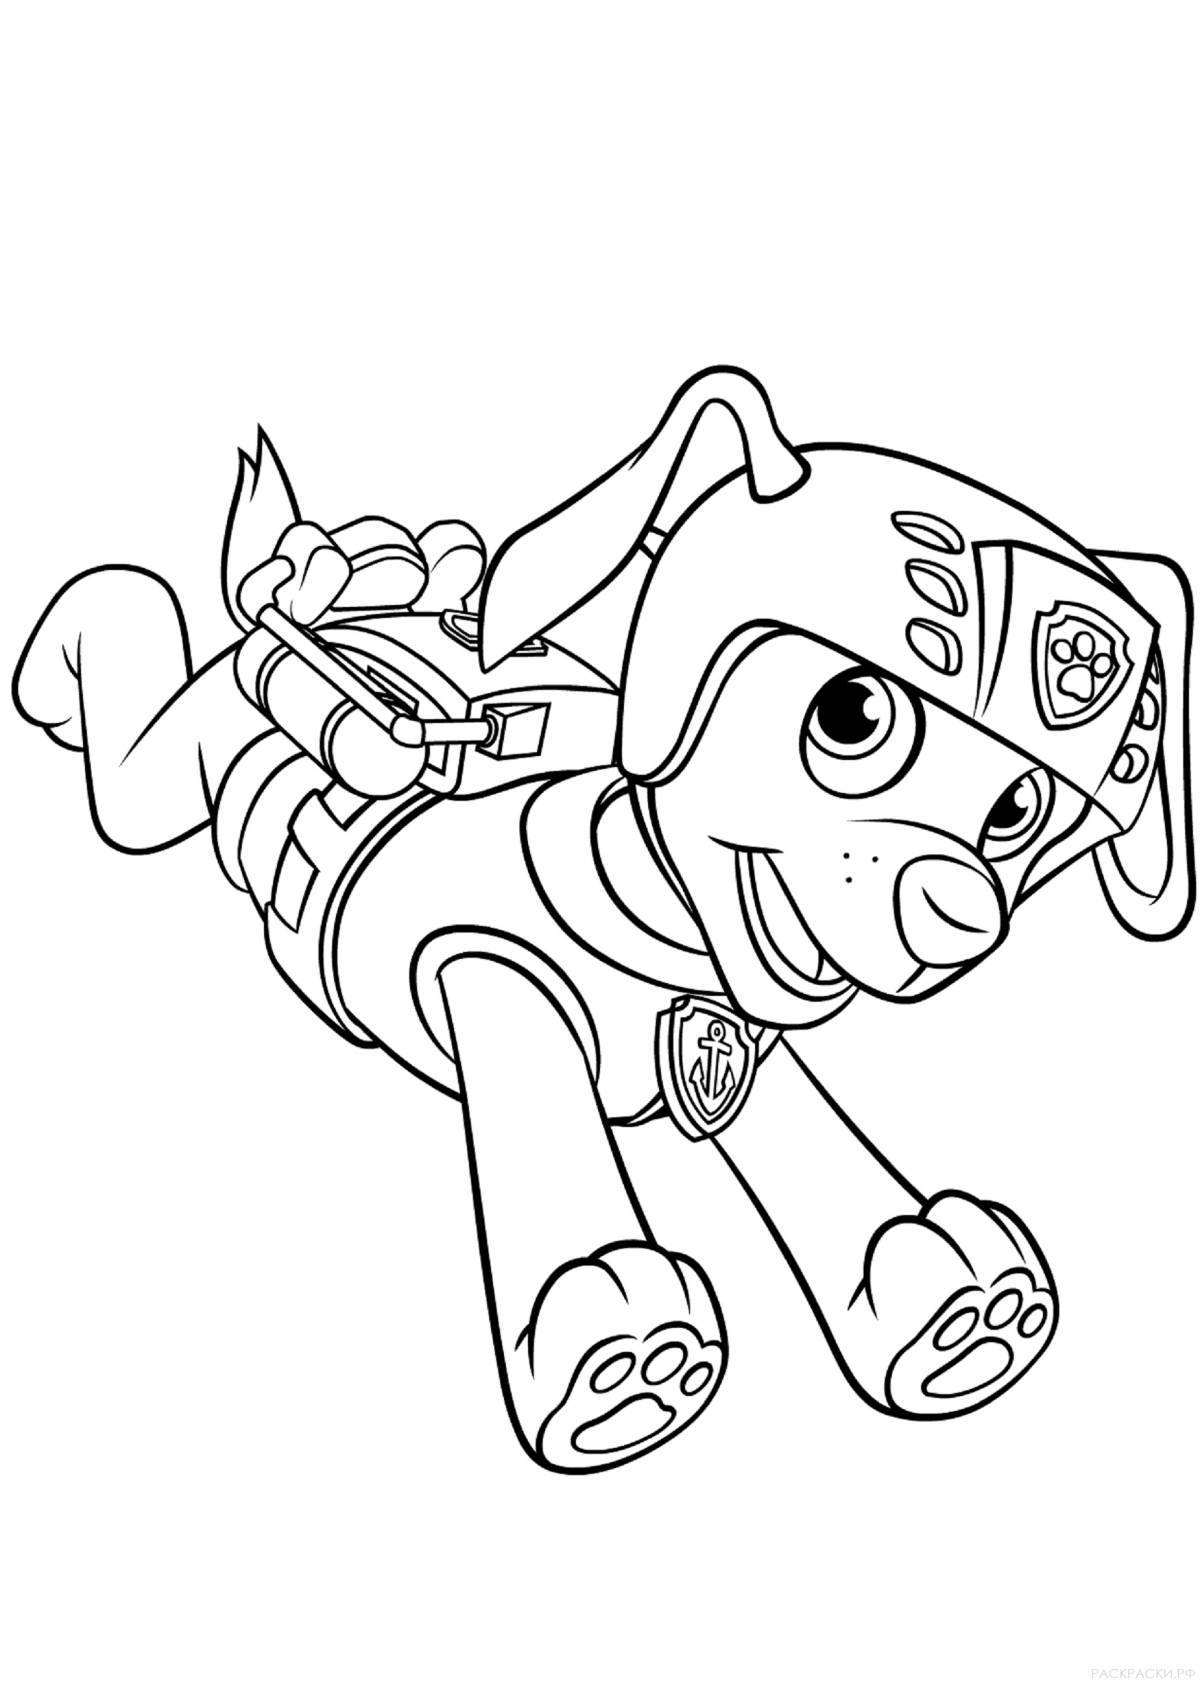 Lovely zoom coloring page